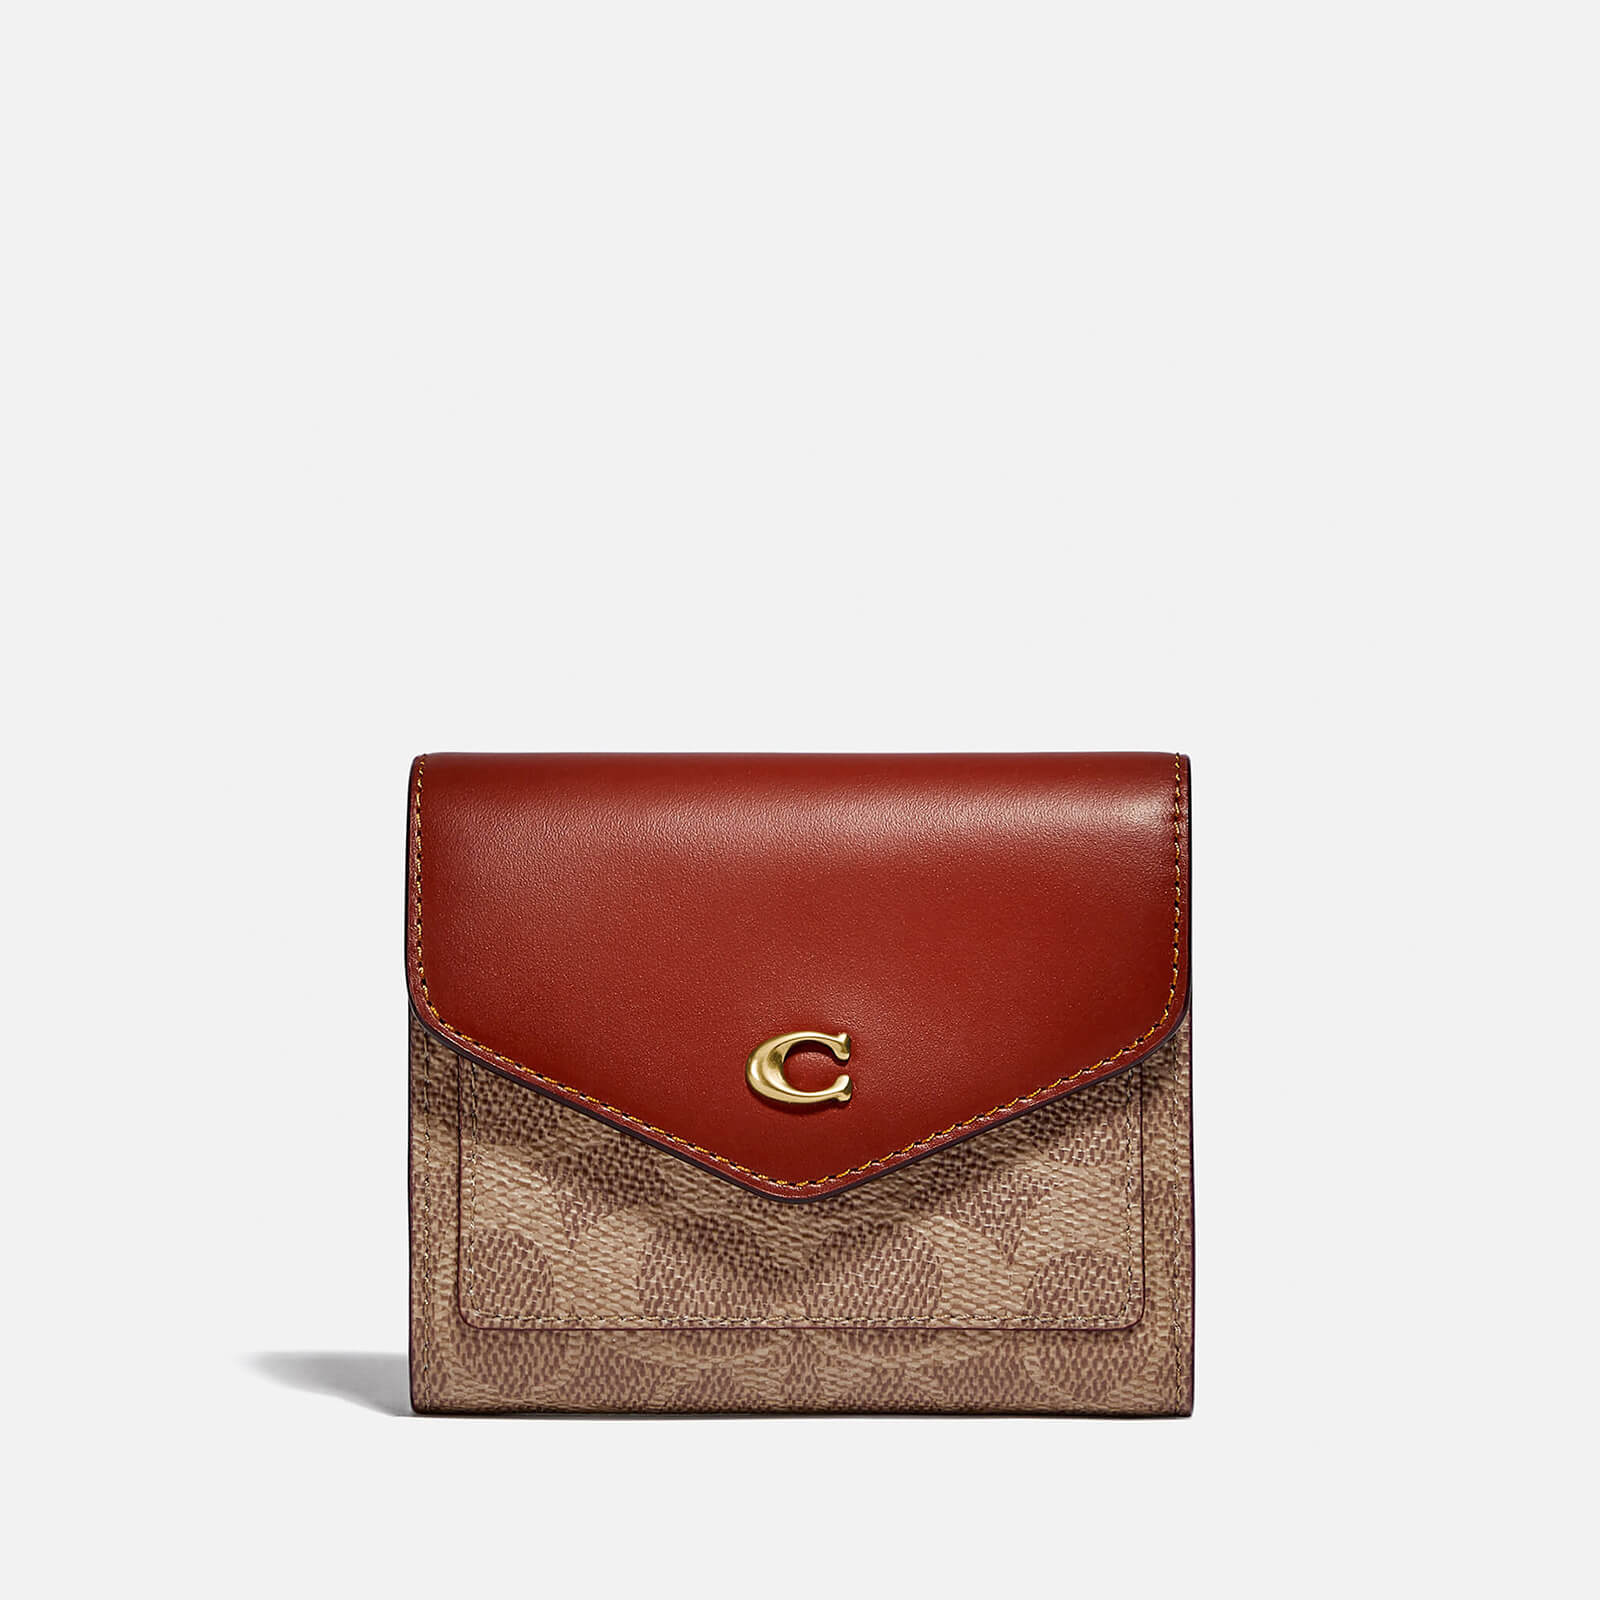 Image of Coach Women's Colorblock Coated Canvas Signature Wallet - Tan Rust